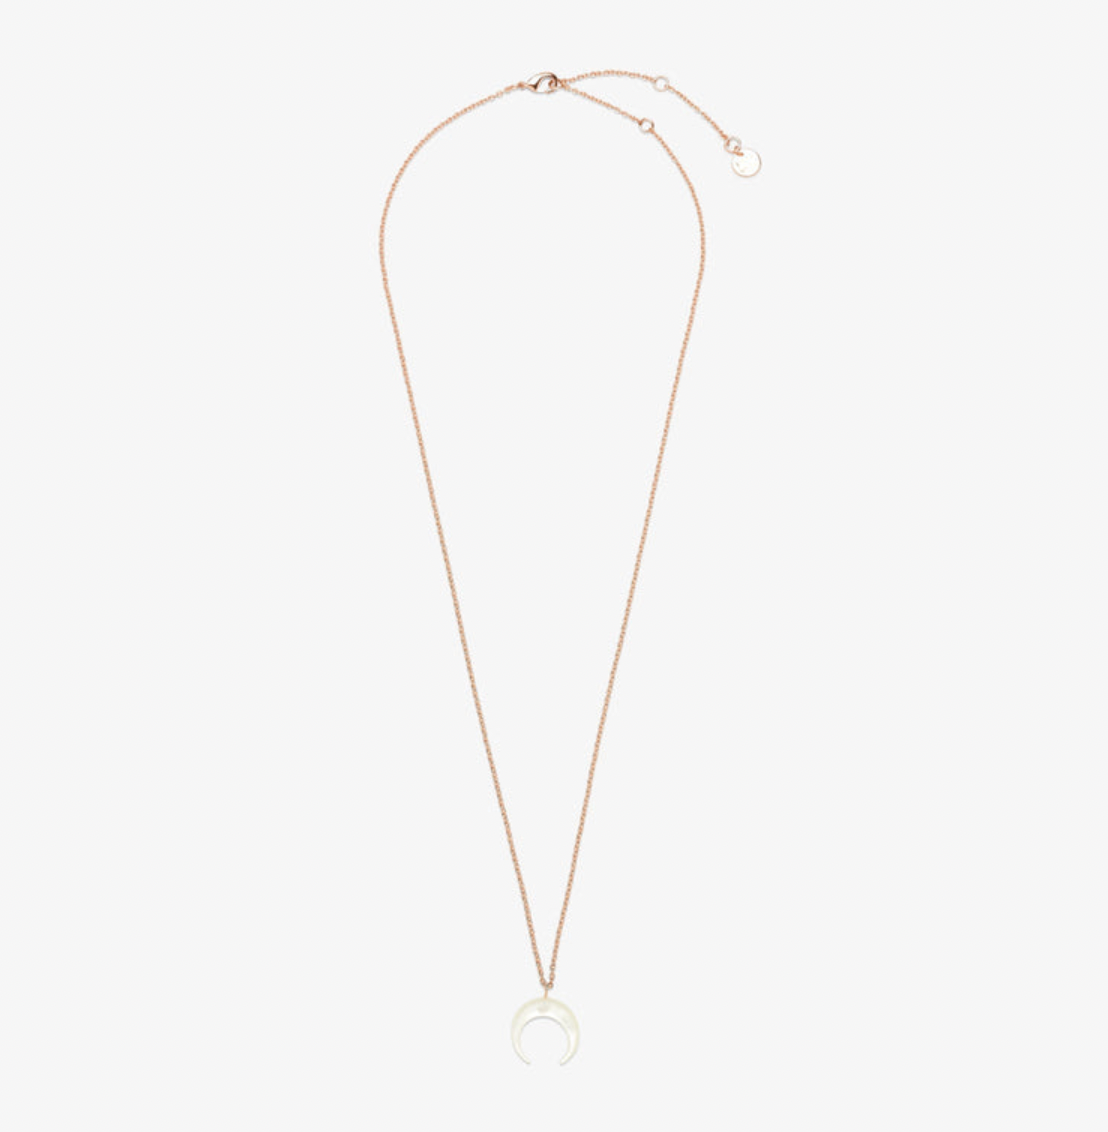 PEARL CRESCENT MOON NECKLACE ROSE GOLD